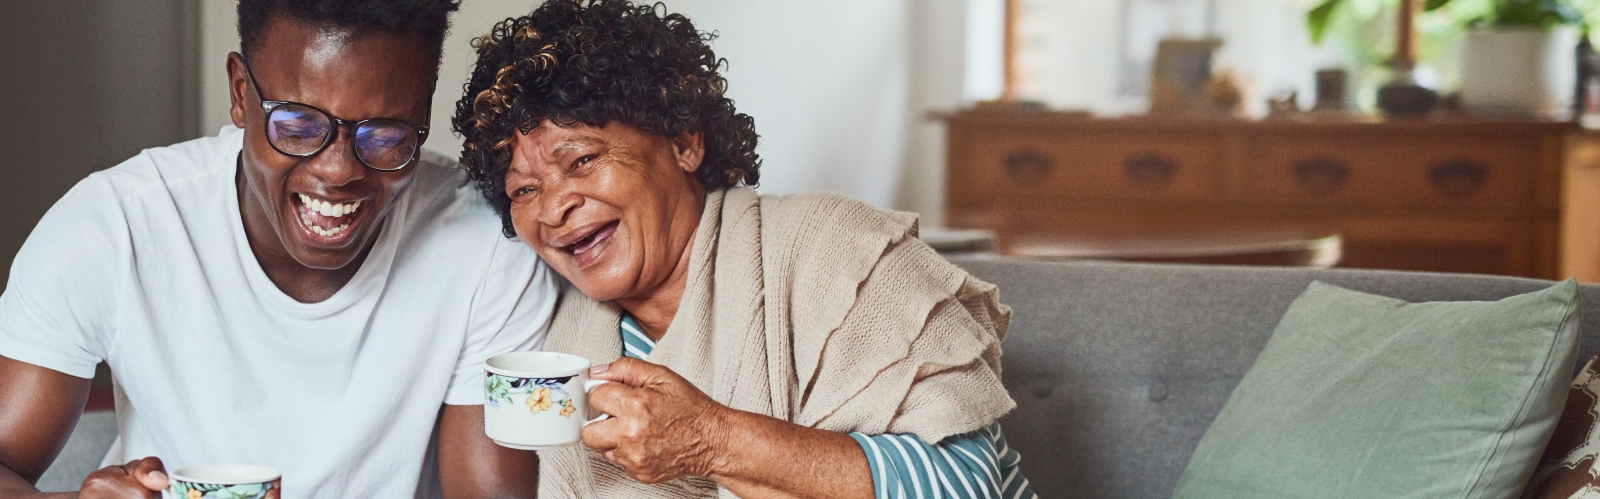 A young man laughs with his grandmother while drinking tea